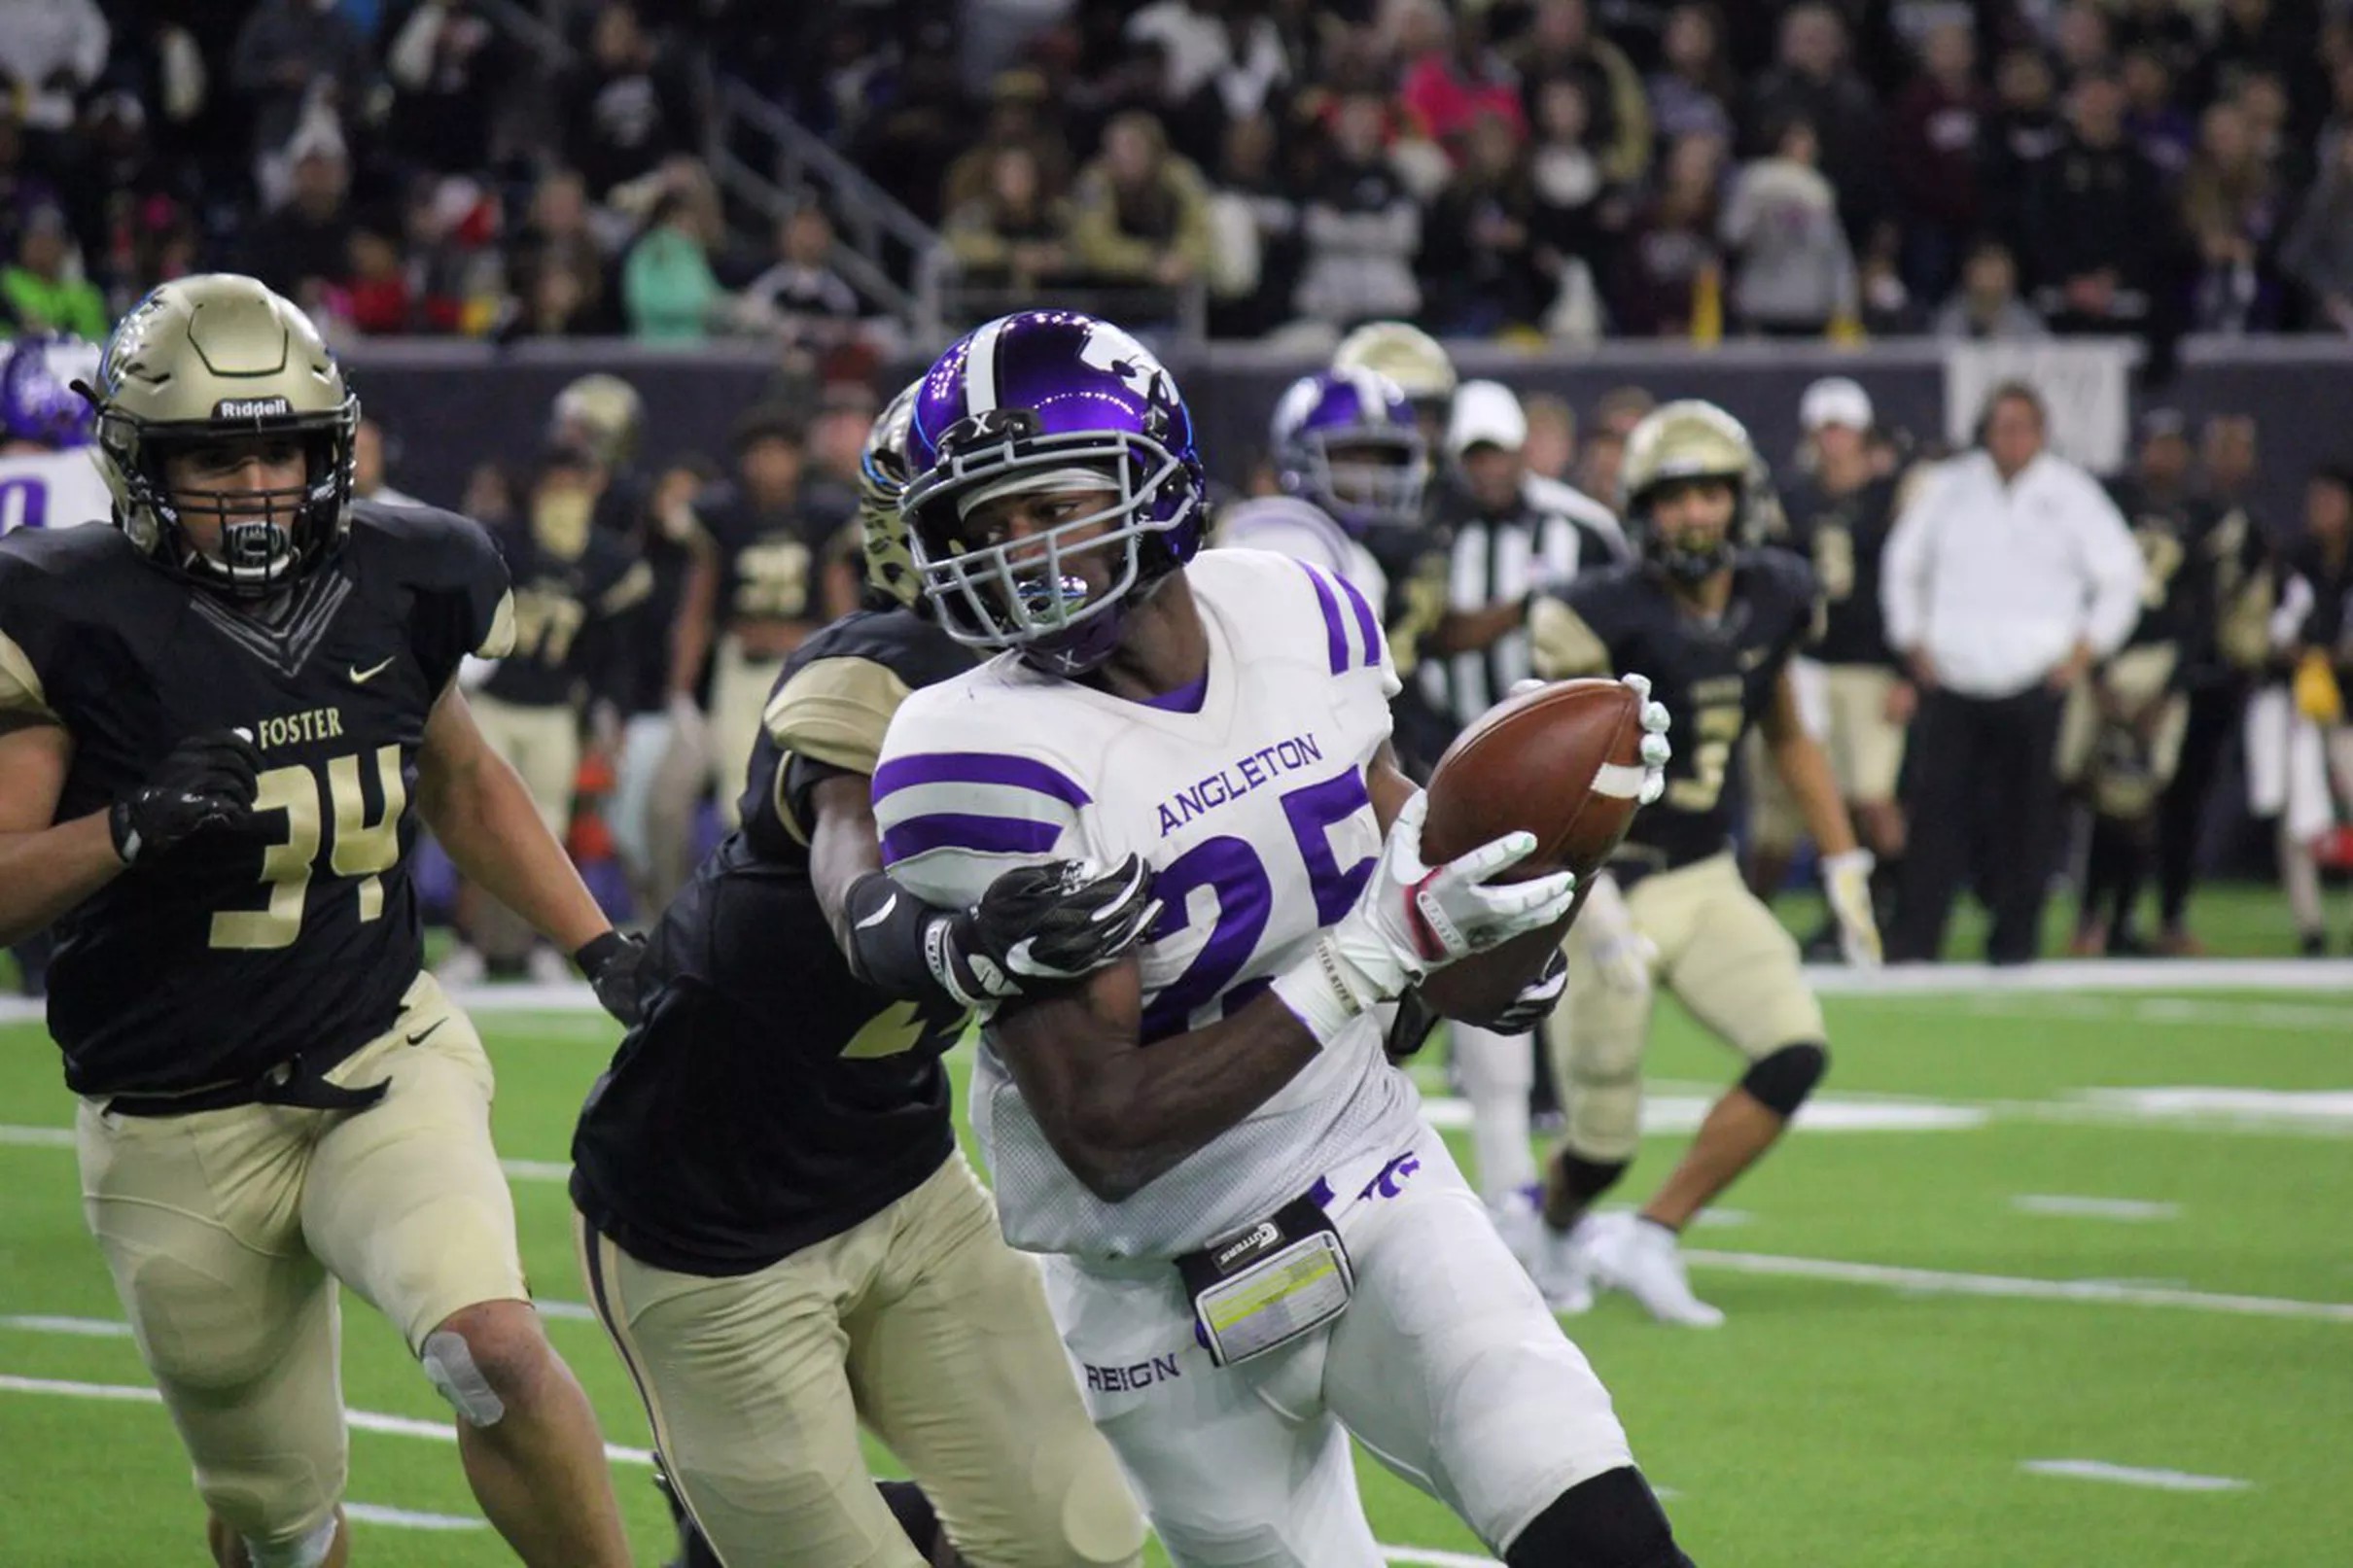 Texas Longhorn commits: State semifinals preview - Texas High School Football Playoffs Are There Games Thanksgiving Week